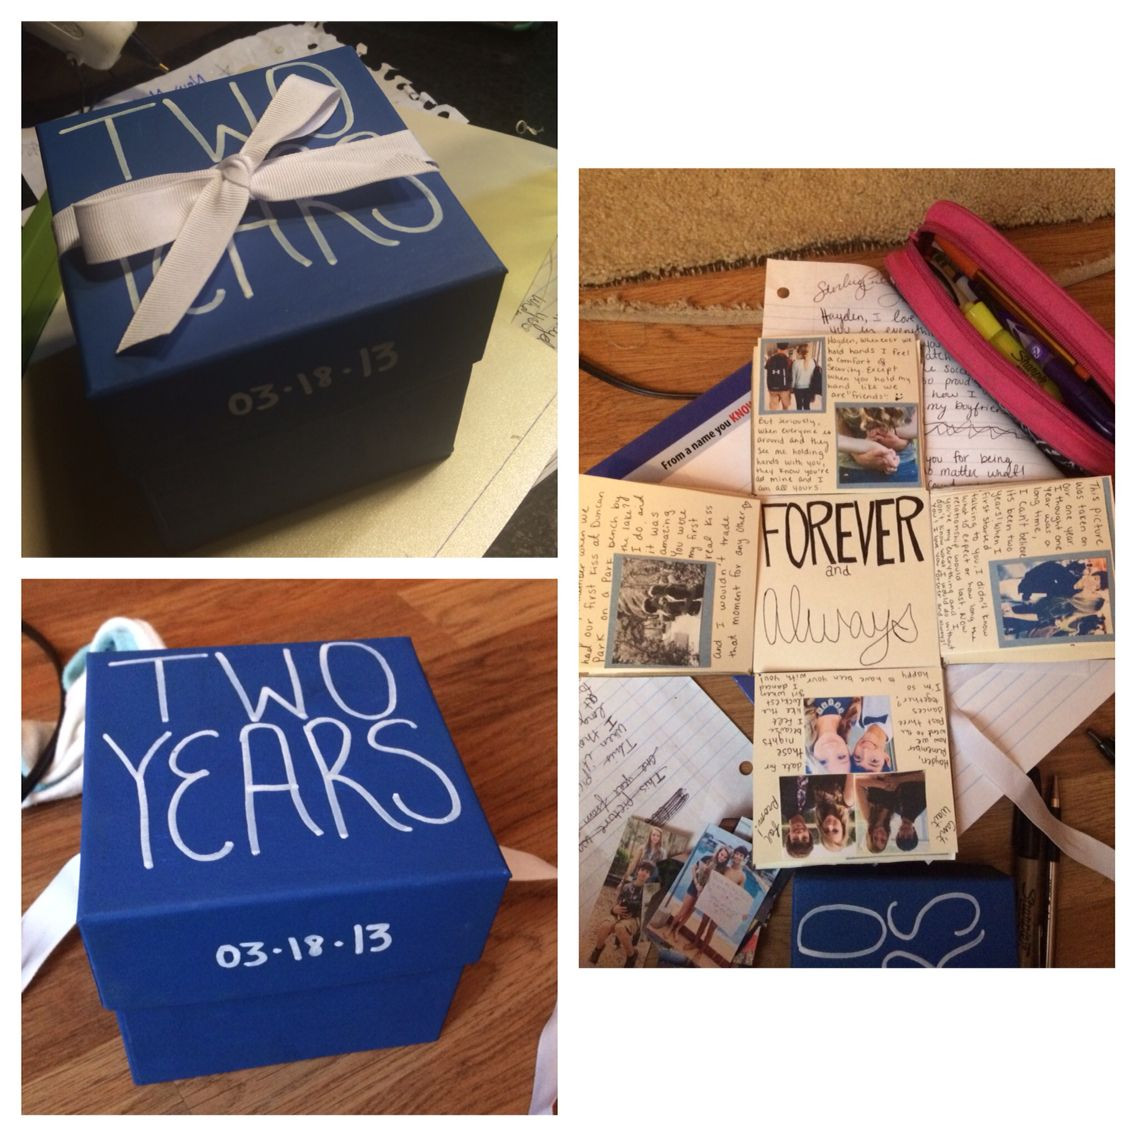 2 Year Dating Anniversary Gift Ideas For Her
 Anniversary box For my boyfriend and I s 2 year I made